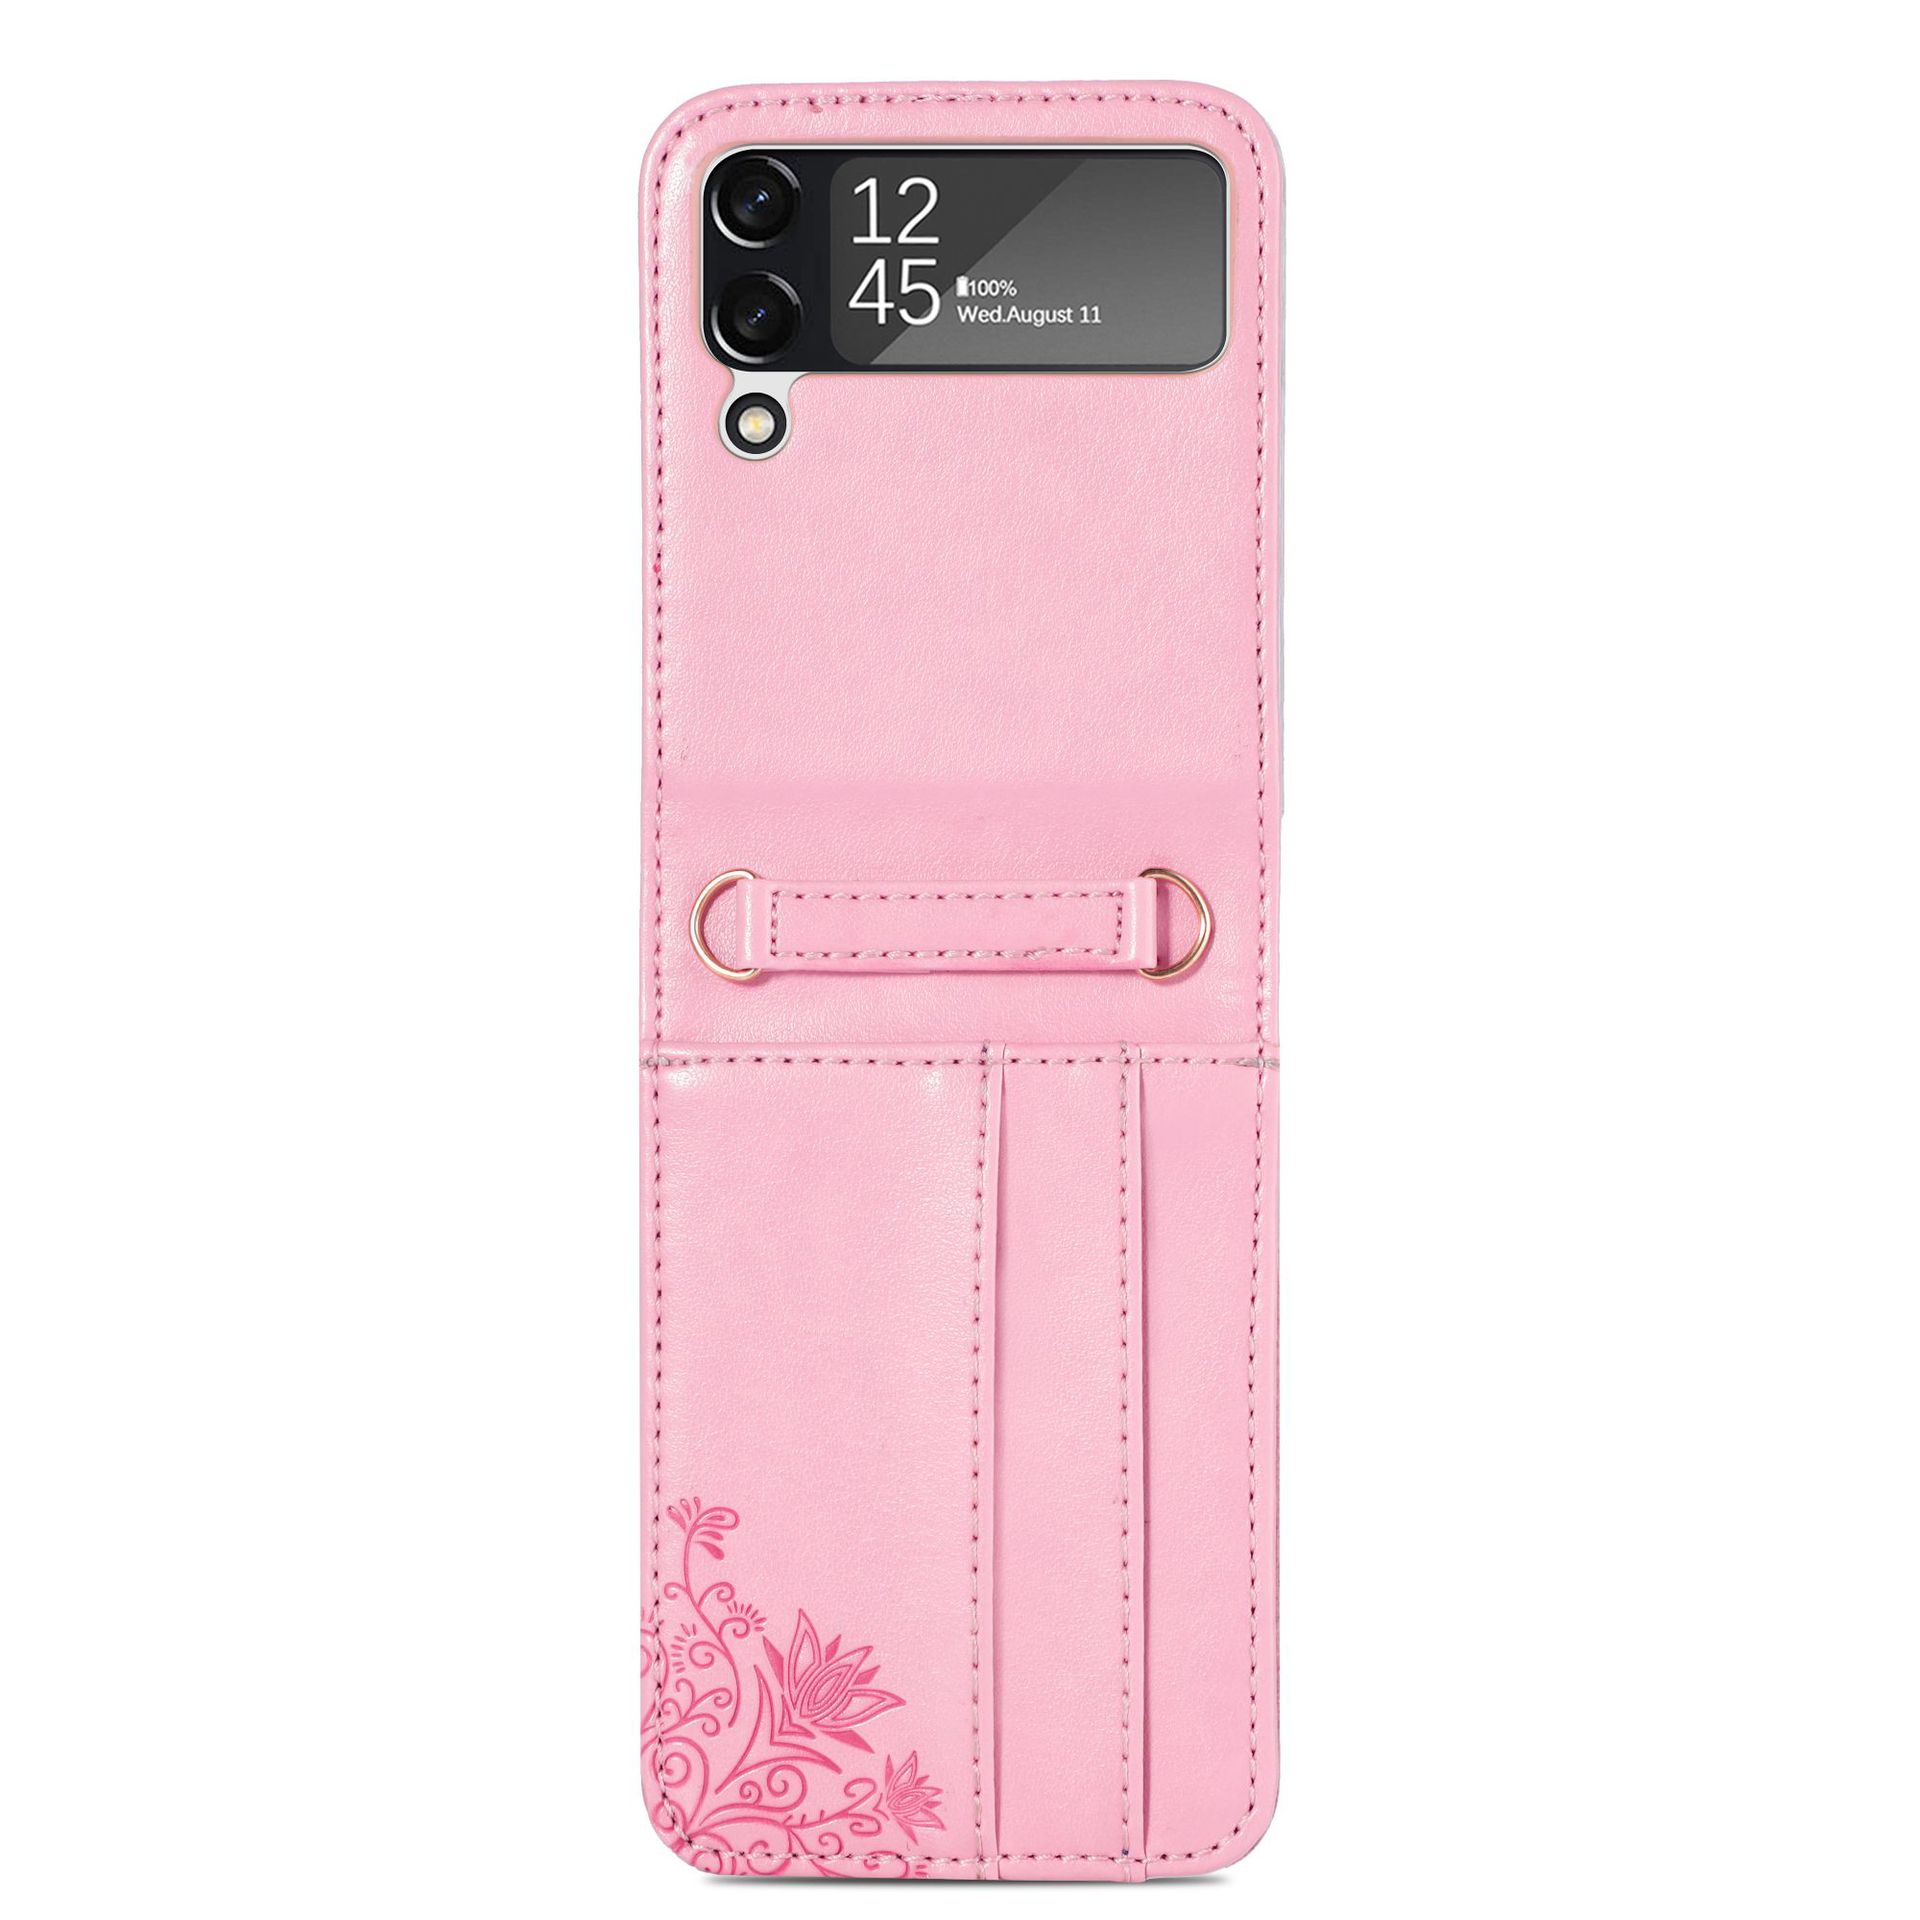 Wholesale Z Flip 3 Case Luxury Lanyard Card Holder Cellphone Cover Soft  leather PU Miss Phone Case For Samsung Galaxy Z Flip3 case From  m.